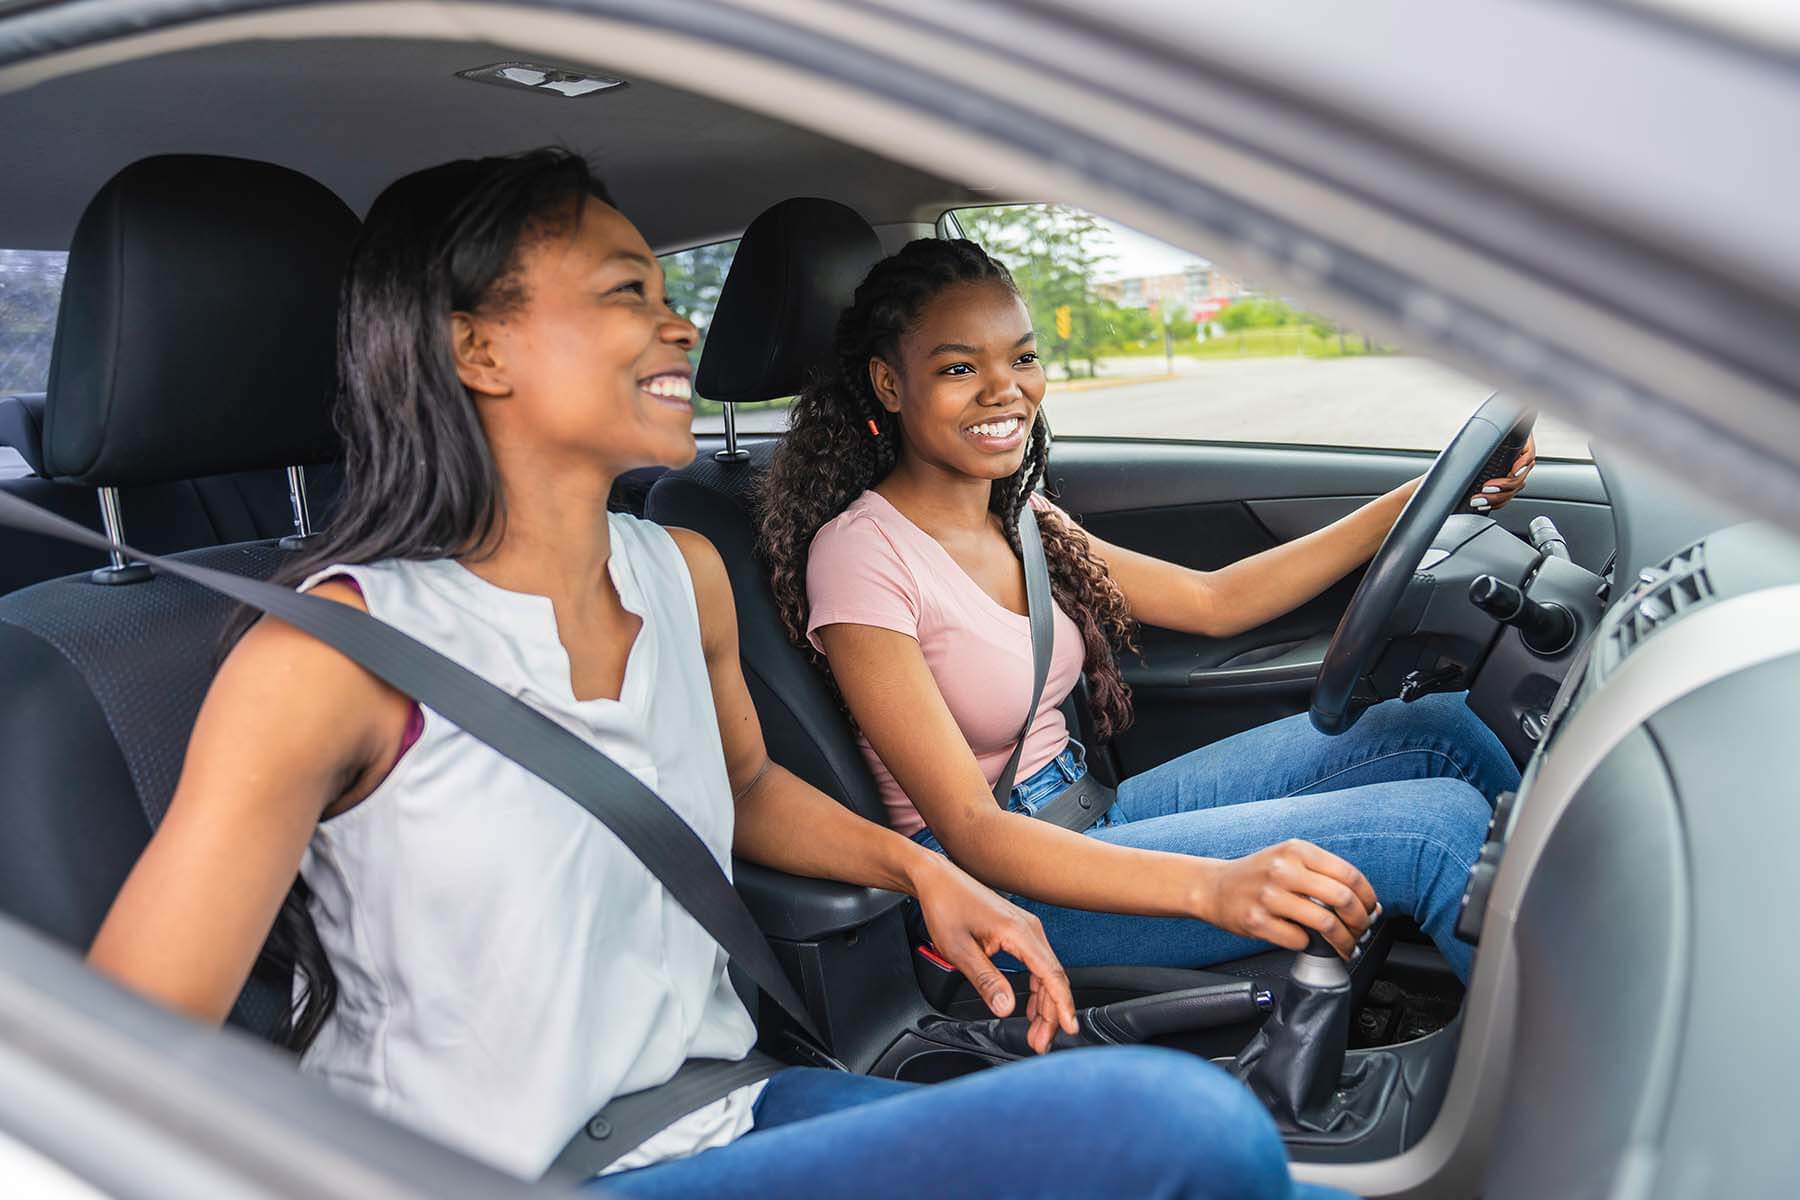 Best cars for teens 15 vehicles under $20K with top safety ratings image photo